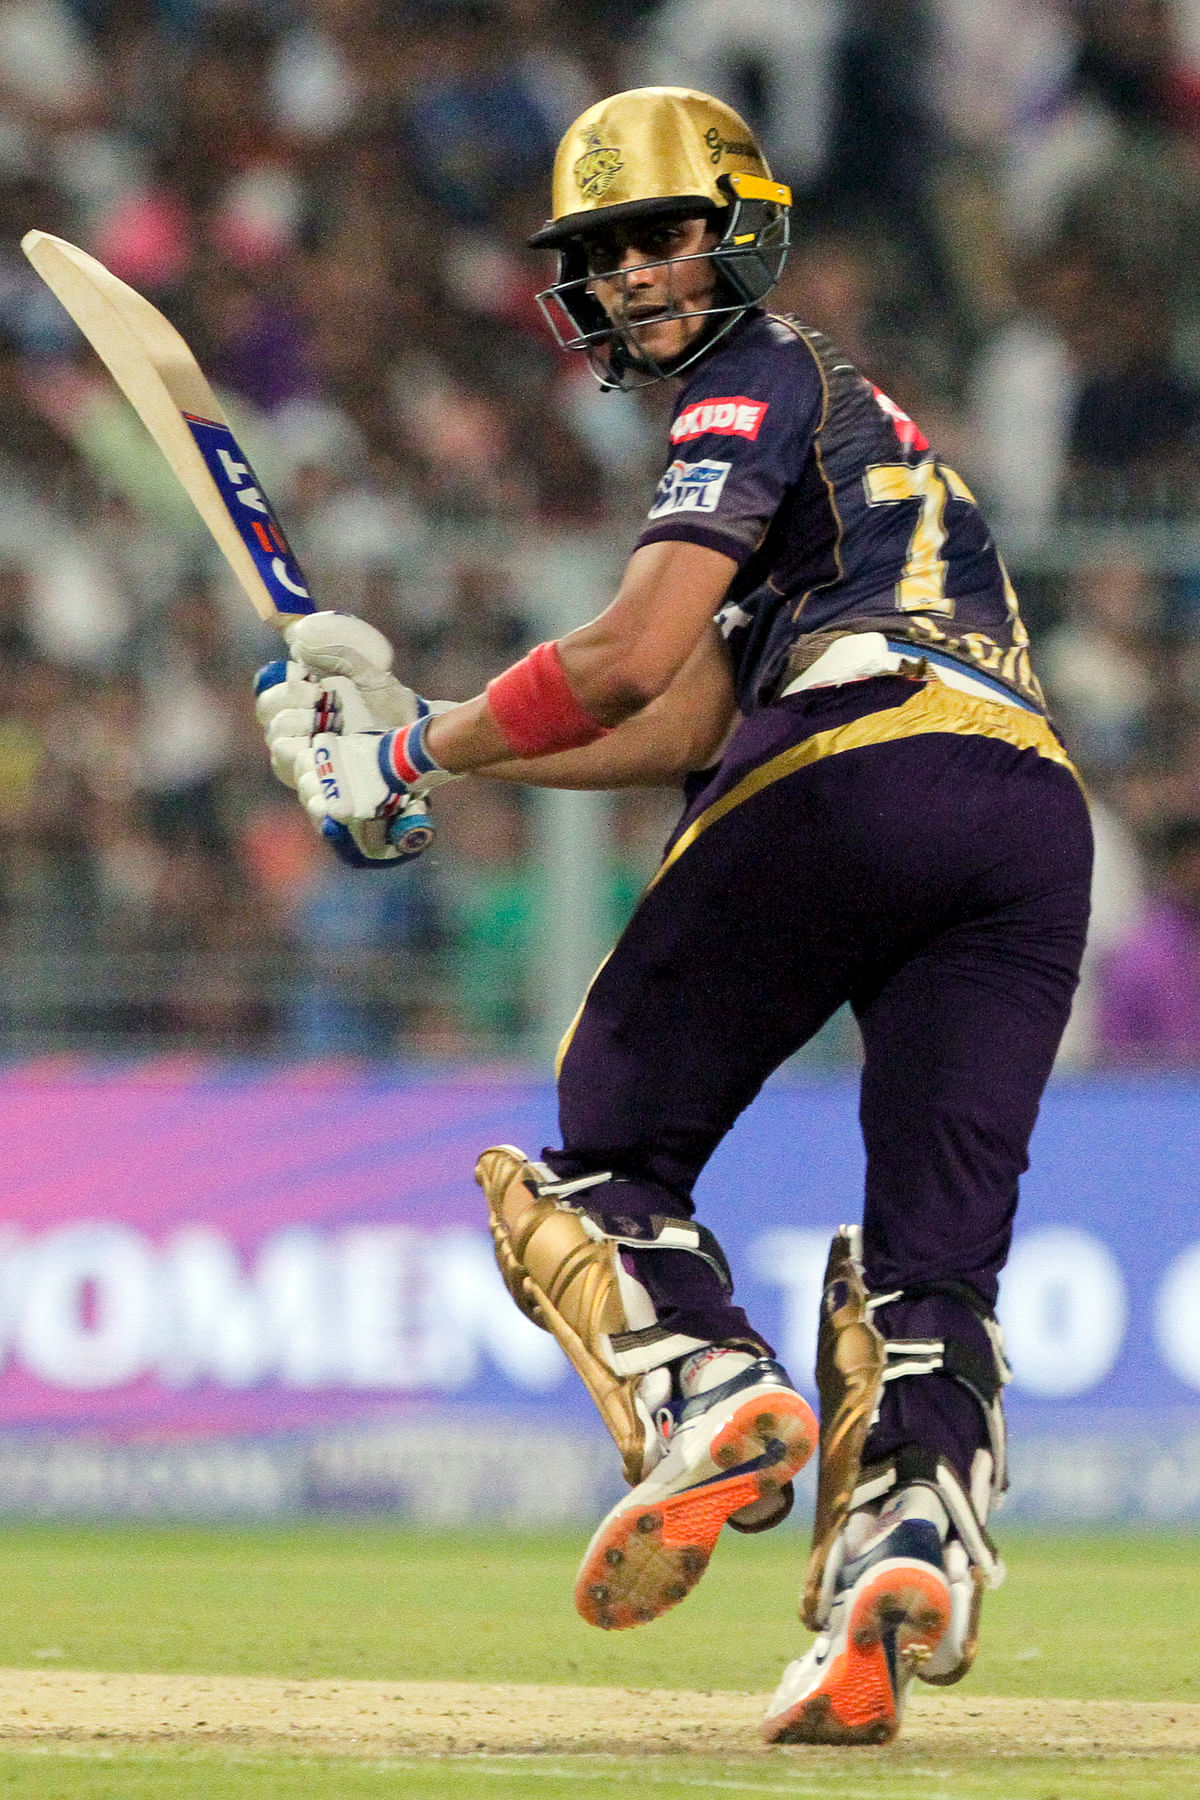 Shubman Gill and Andre Russell powered Kolkata Knight Riders to a massive 232/2 against Mumbai Indians.